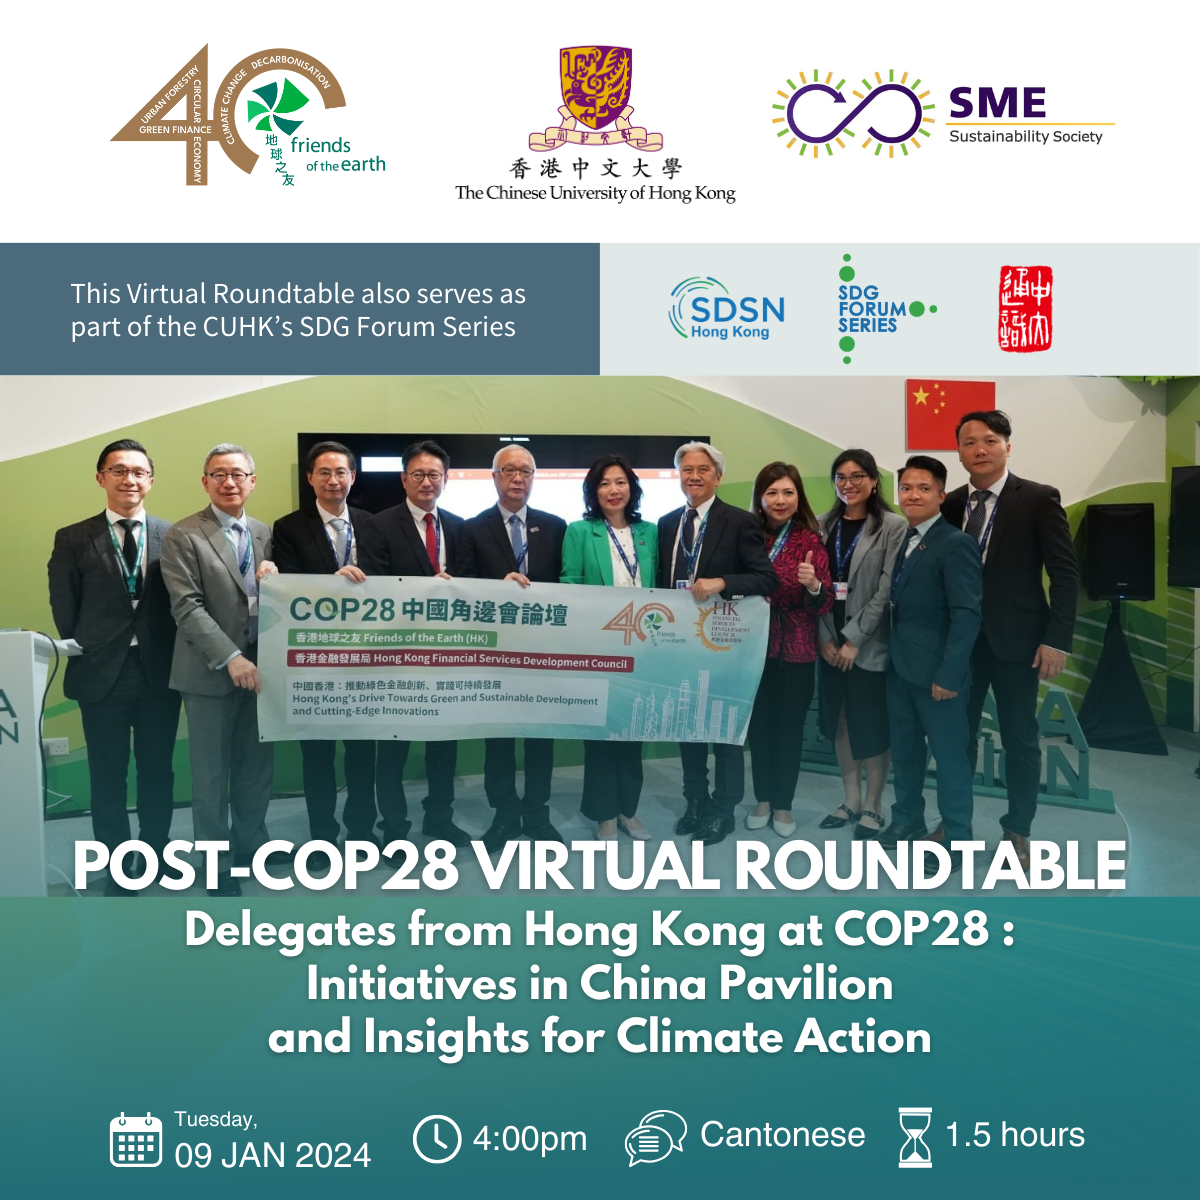 Post-COP28 Virtual Roundtable – Delegates from Hong Kong at COP28: Initiatives in China Pavilion and Insights for Climate Action